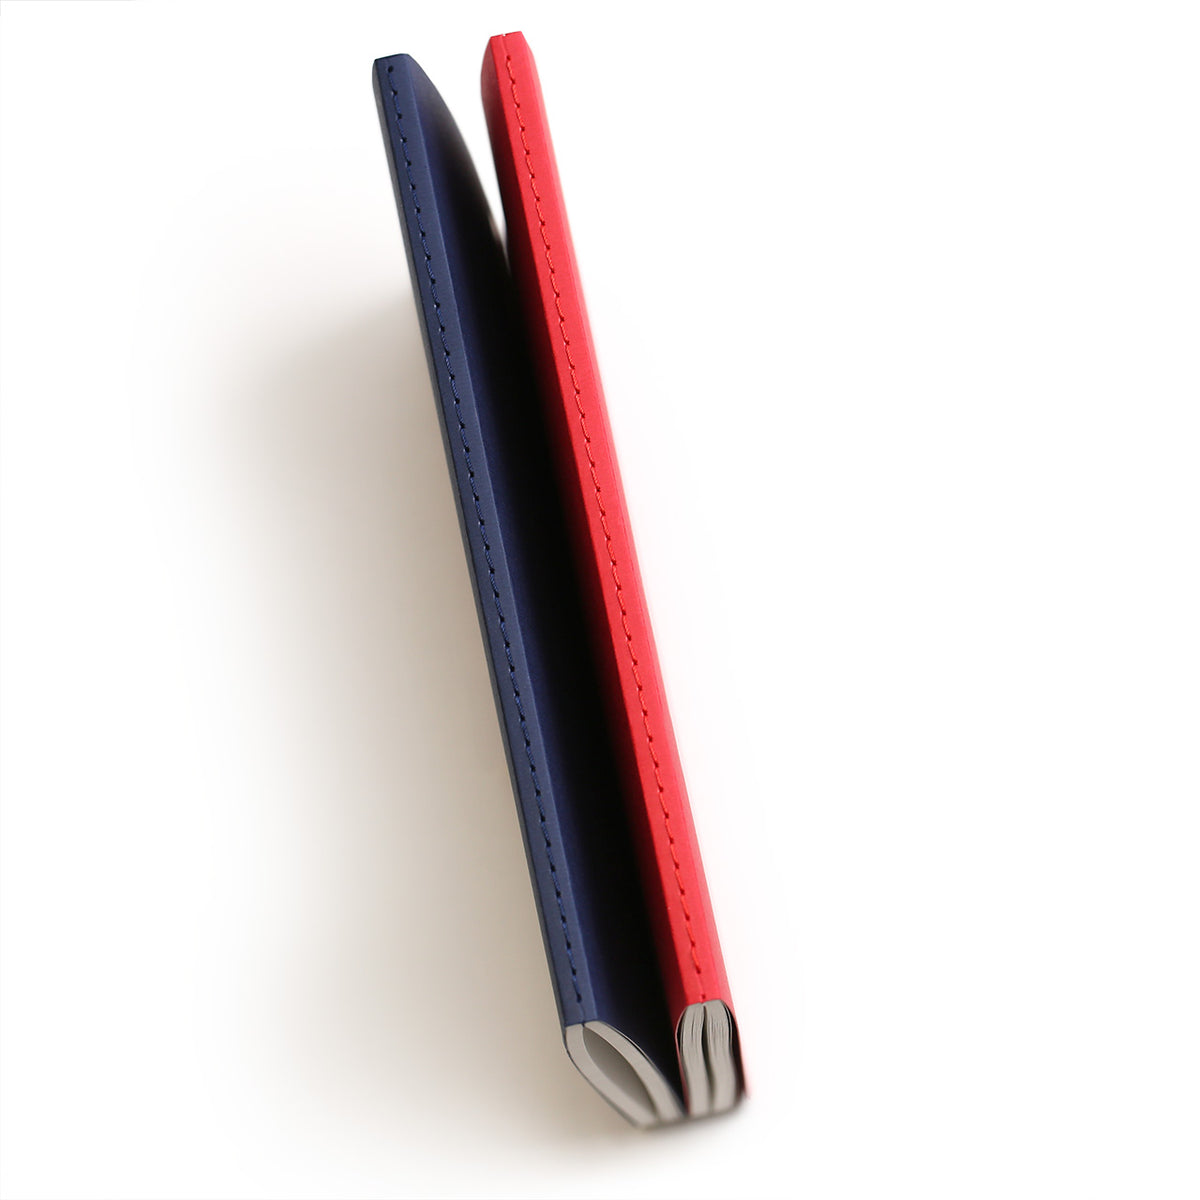 The outer spines of a red and blue refill notebook showing the matching colured stitching